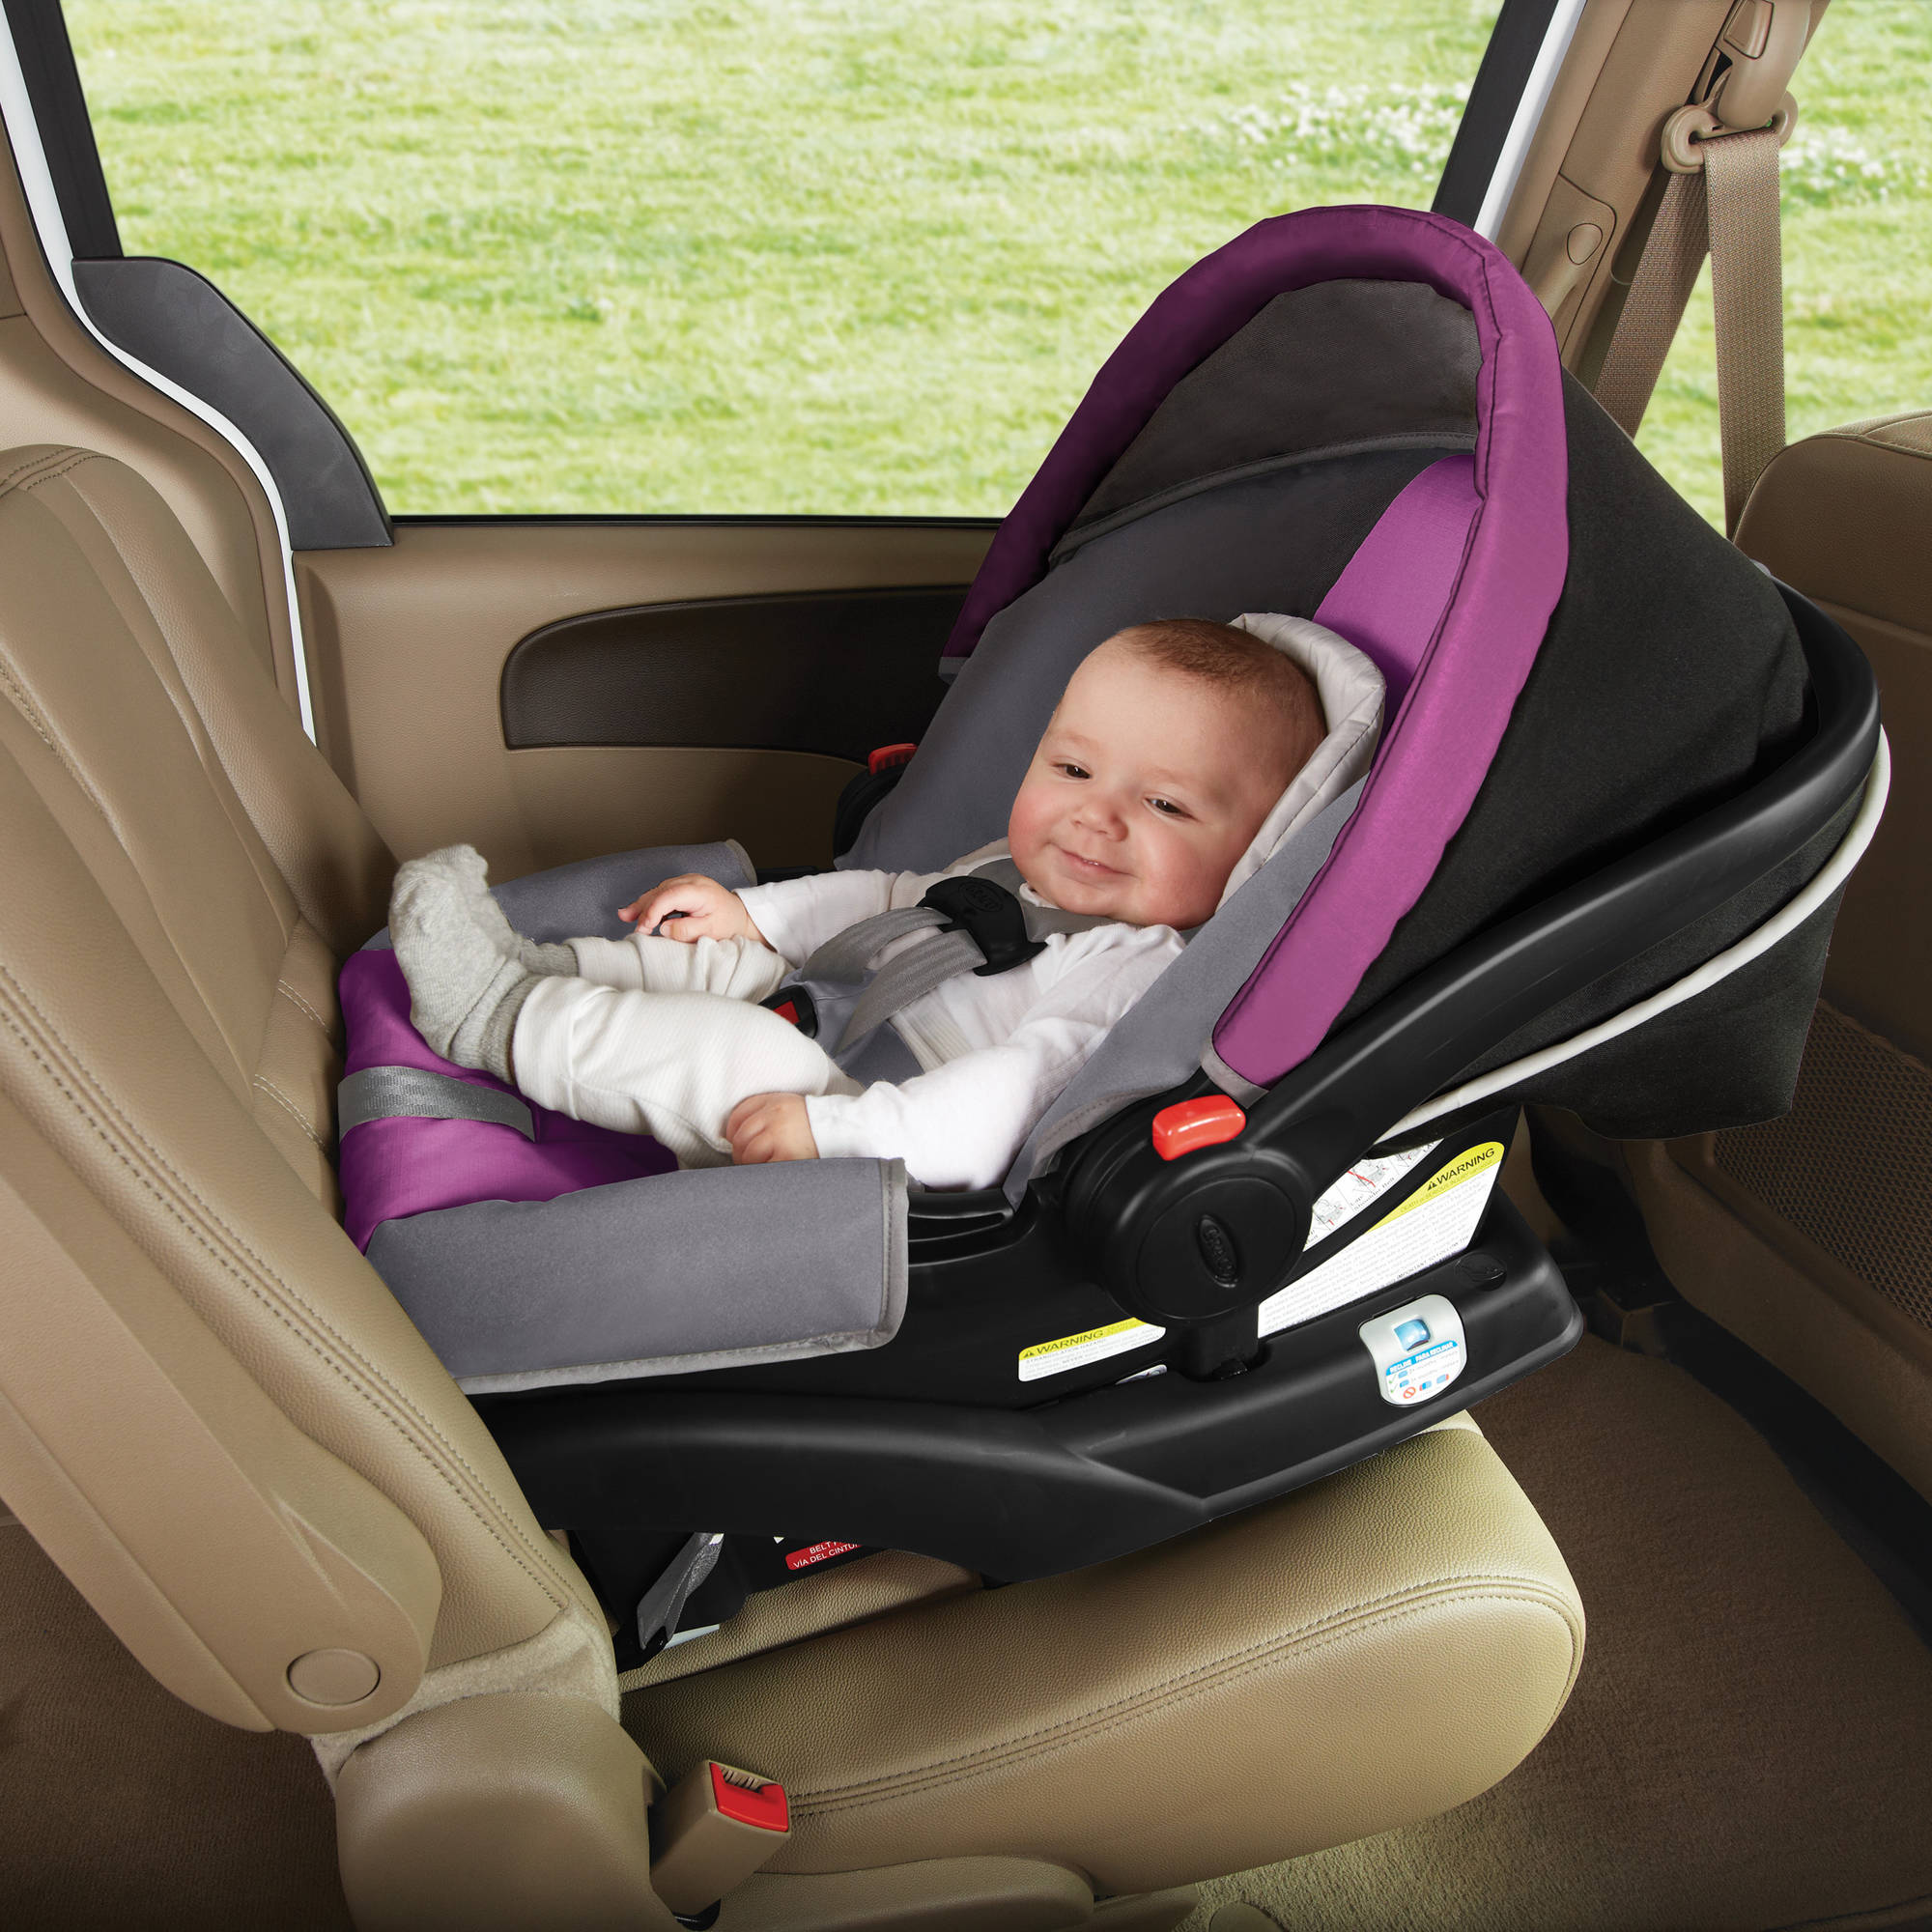 Types of Car Seats: A Buyers Comprehensive Guide